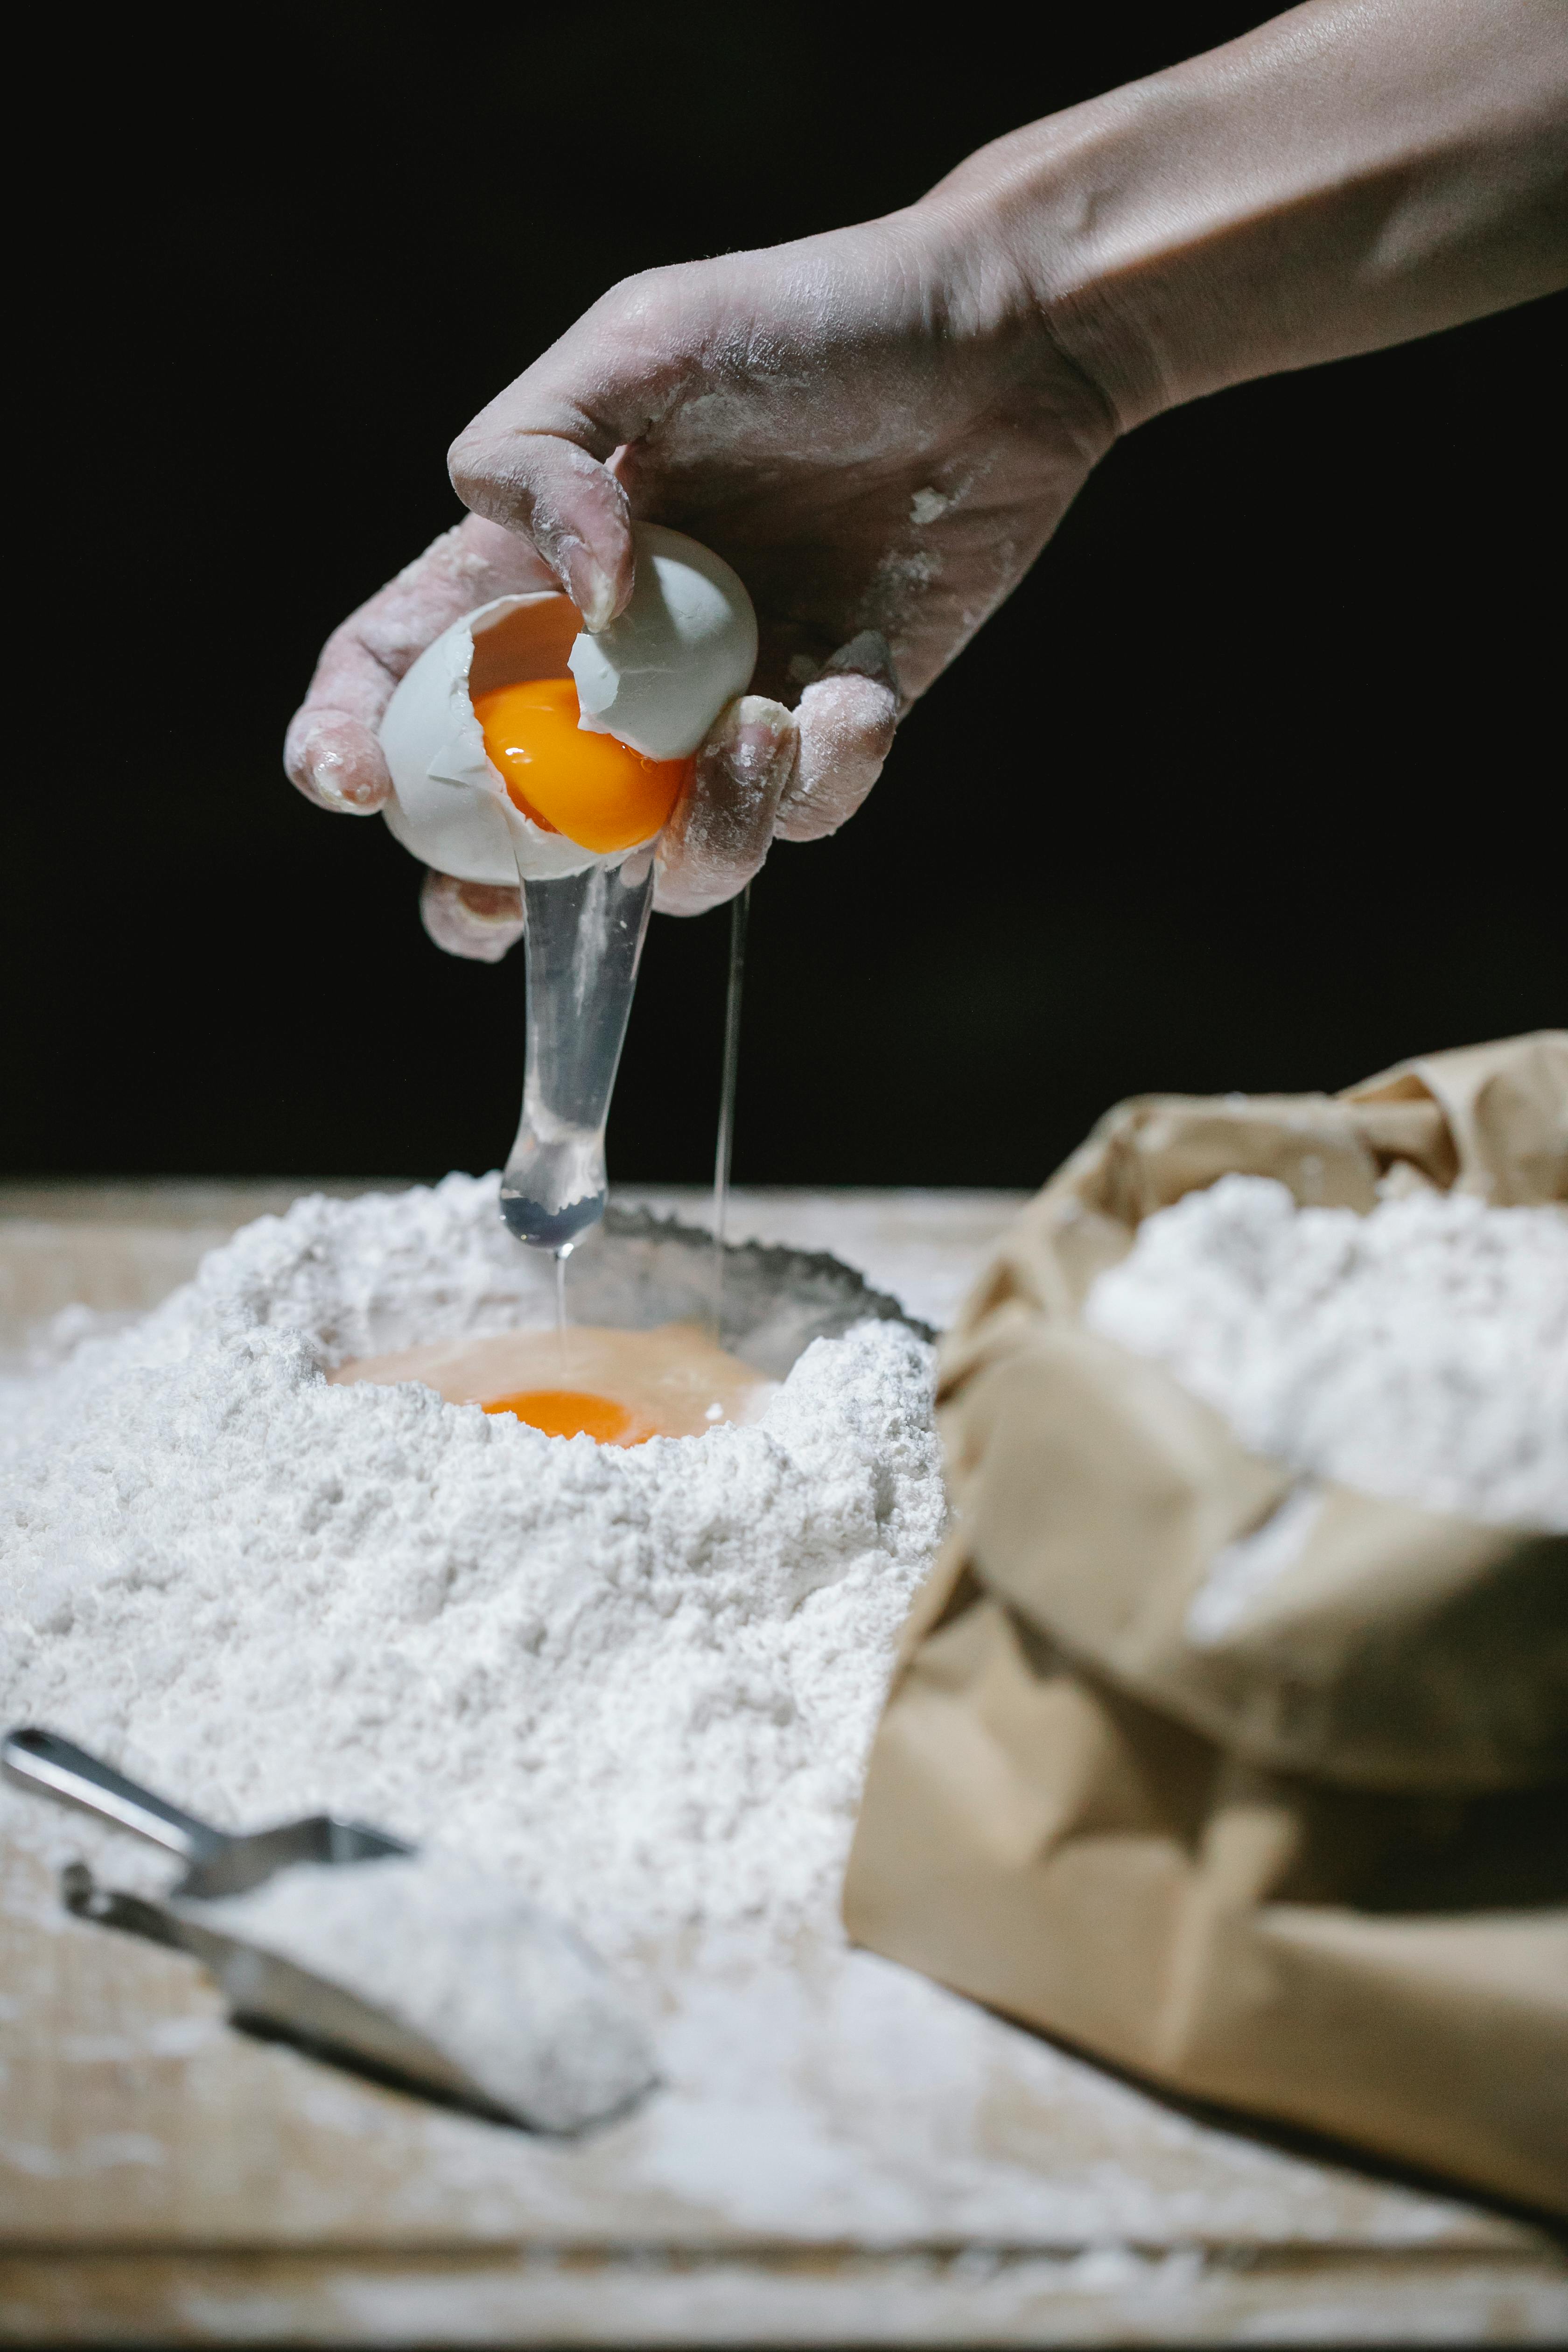 chef breaking egg into flour for pastry